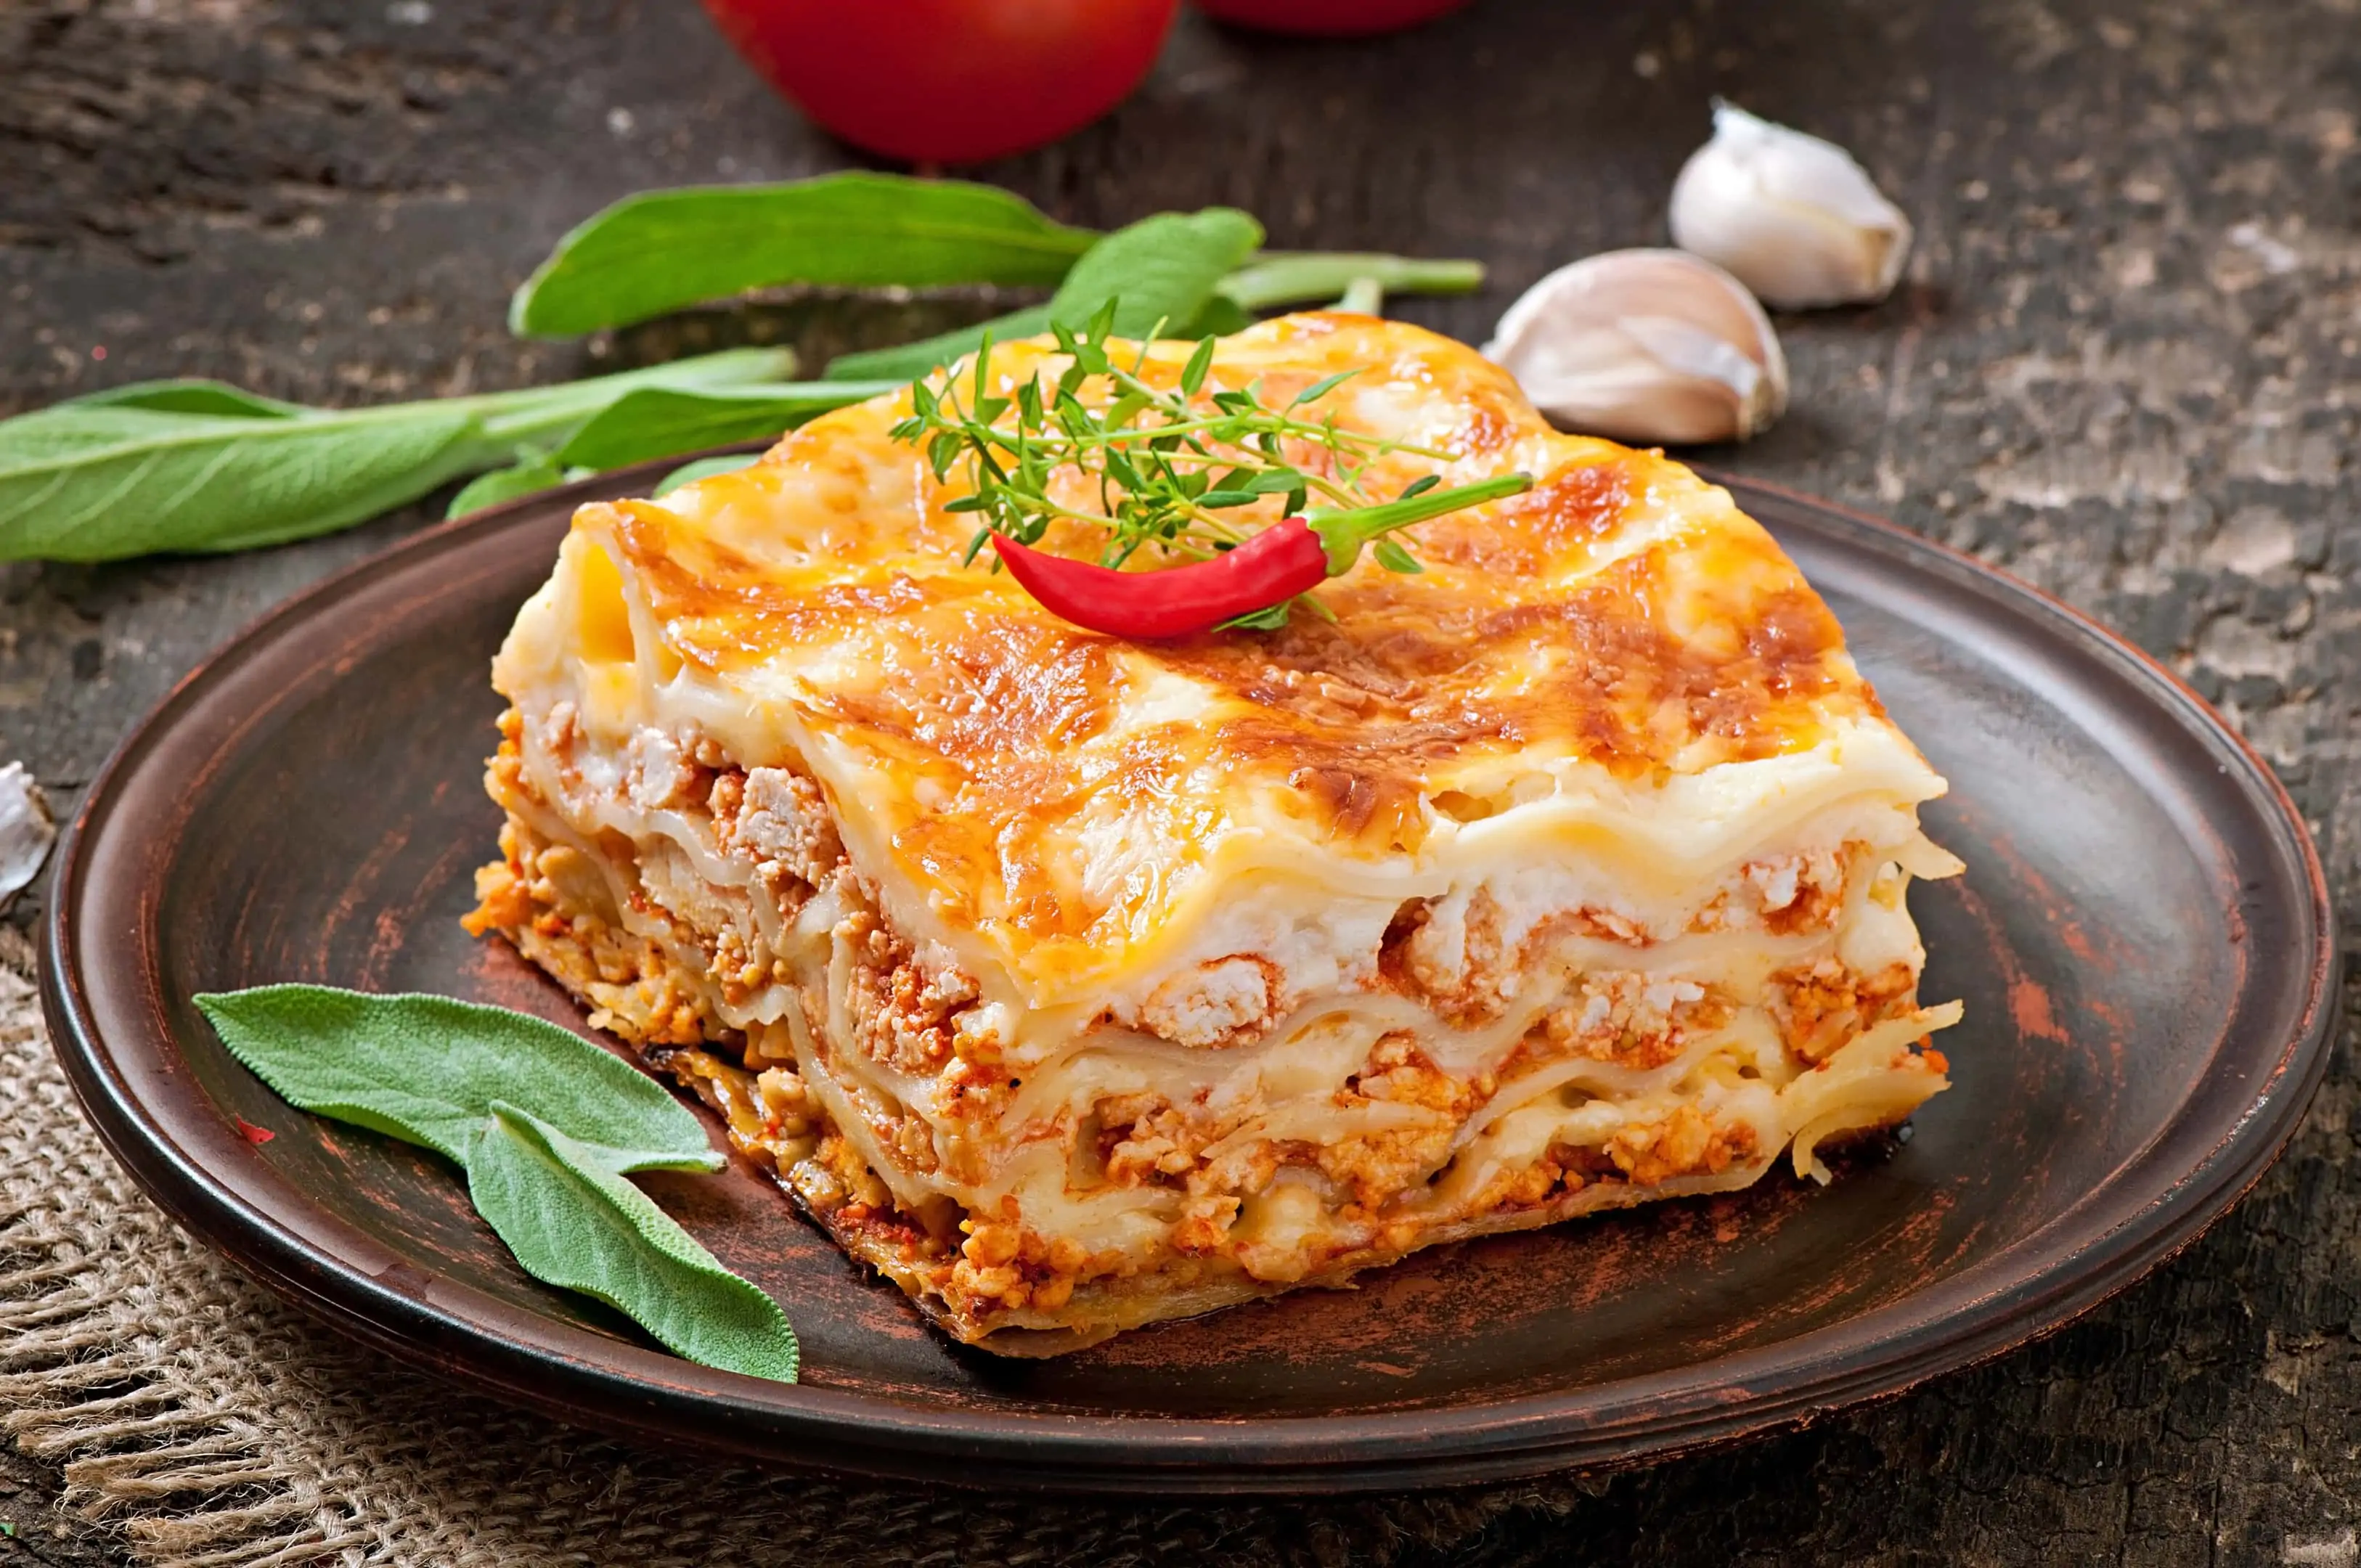 Our recipe for lasagna with ricotta cheese